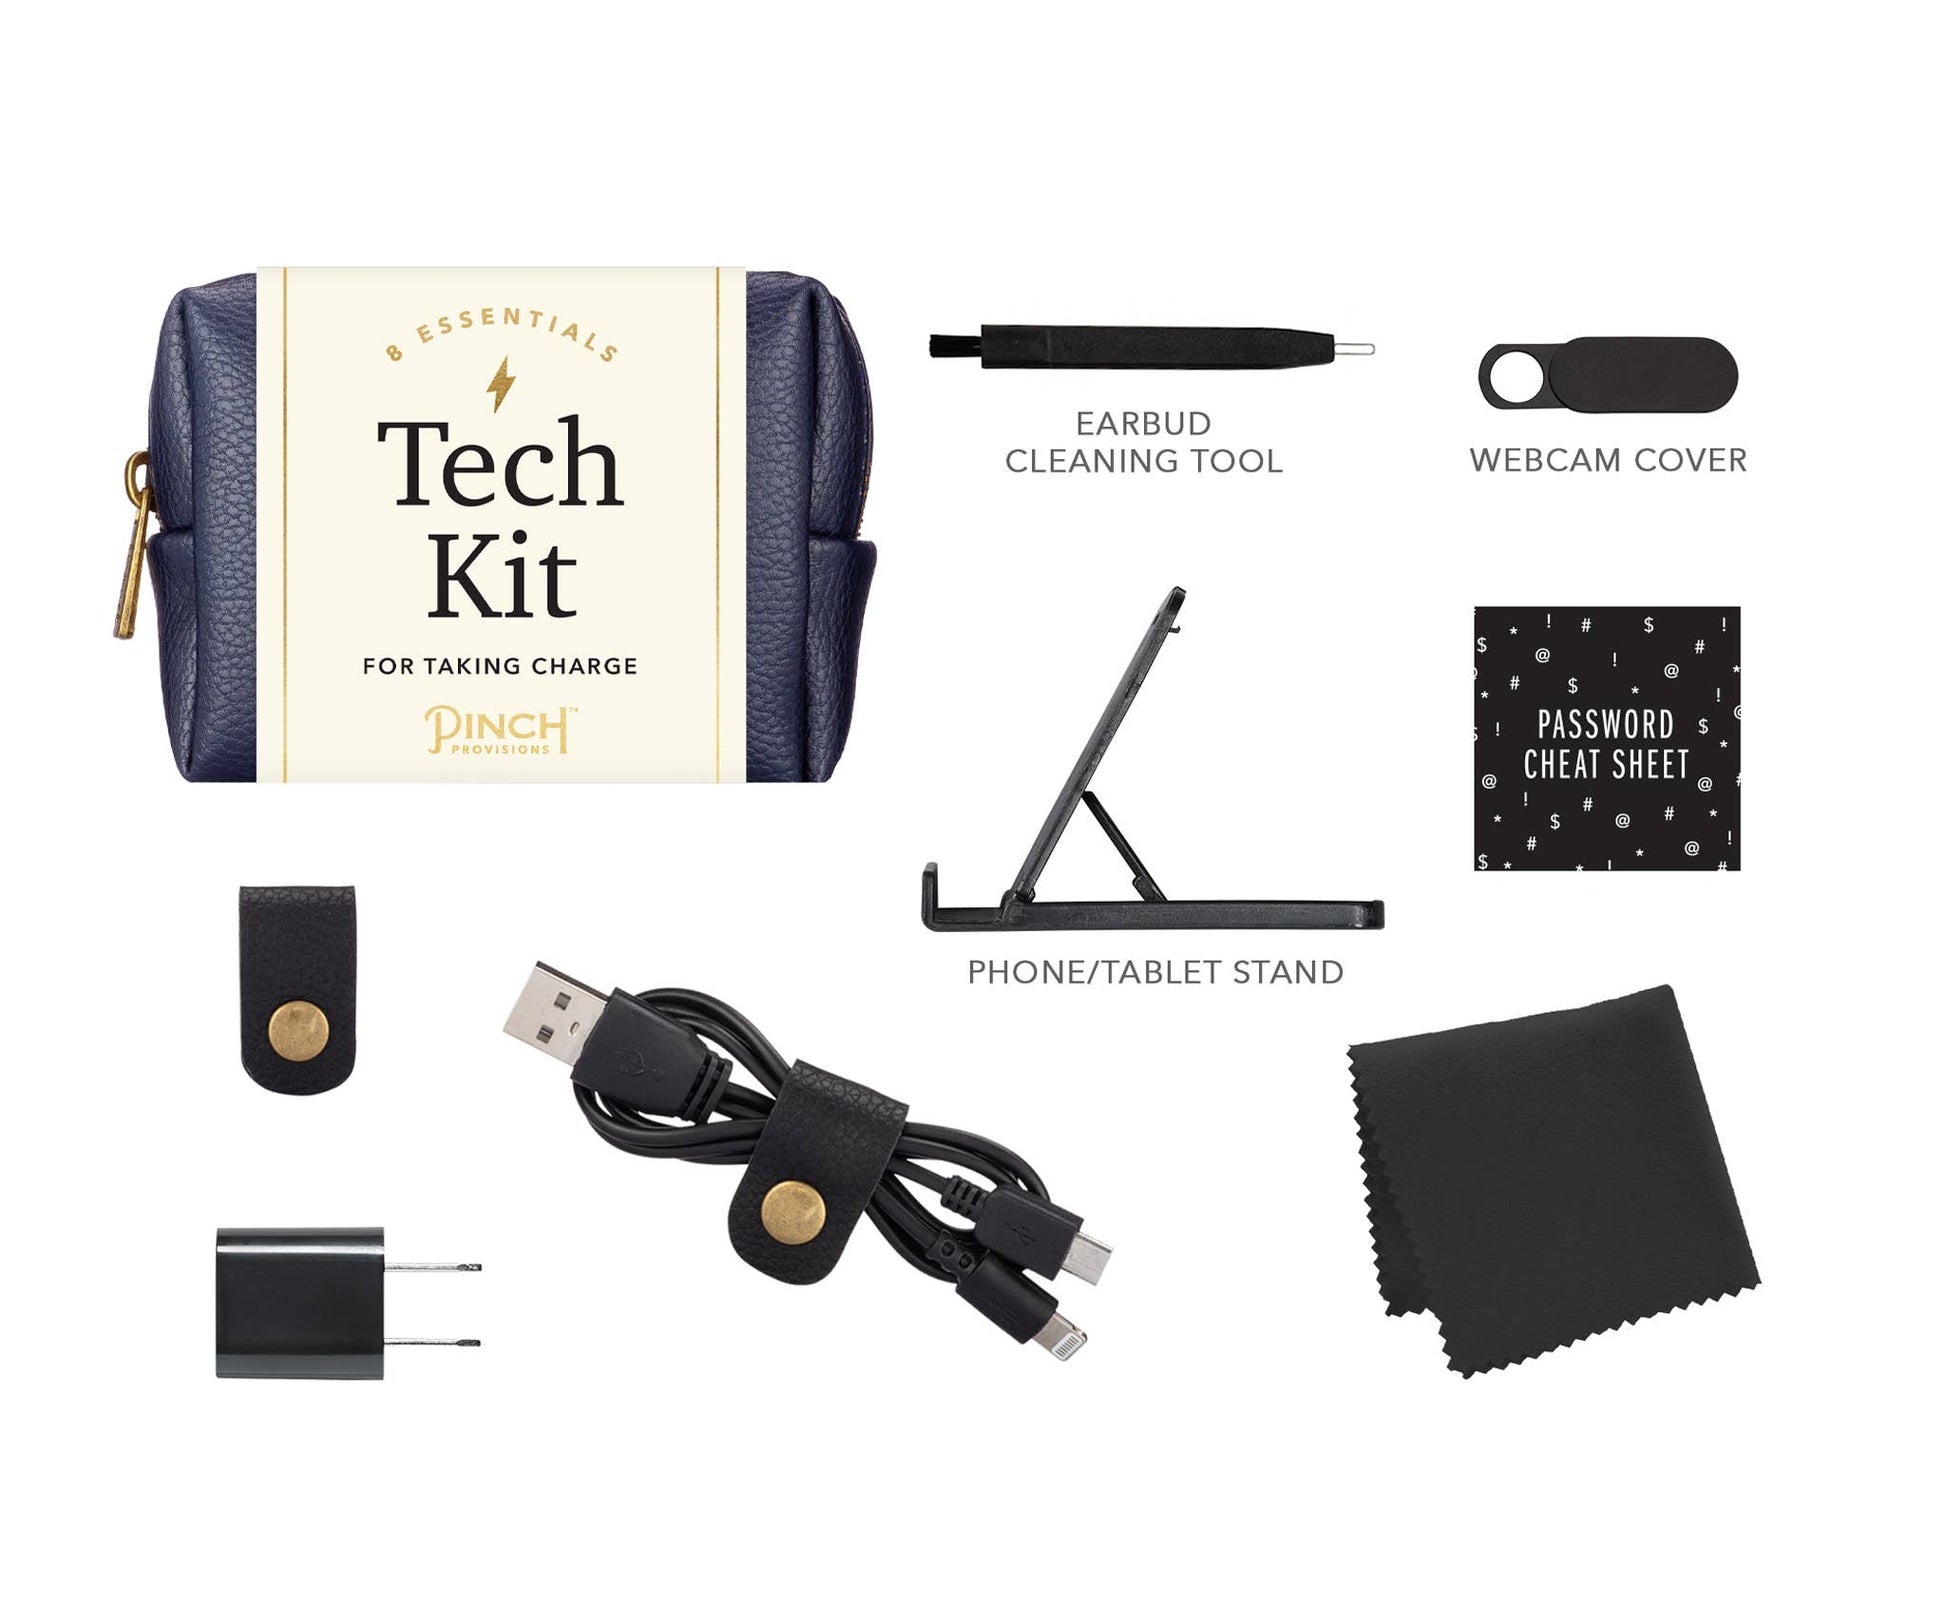 PINCH Provisions - Unisex Tech Kit  Pinch Provisions   -better made easy-eco-friendly-sustainable-gifting